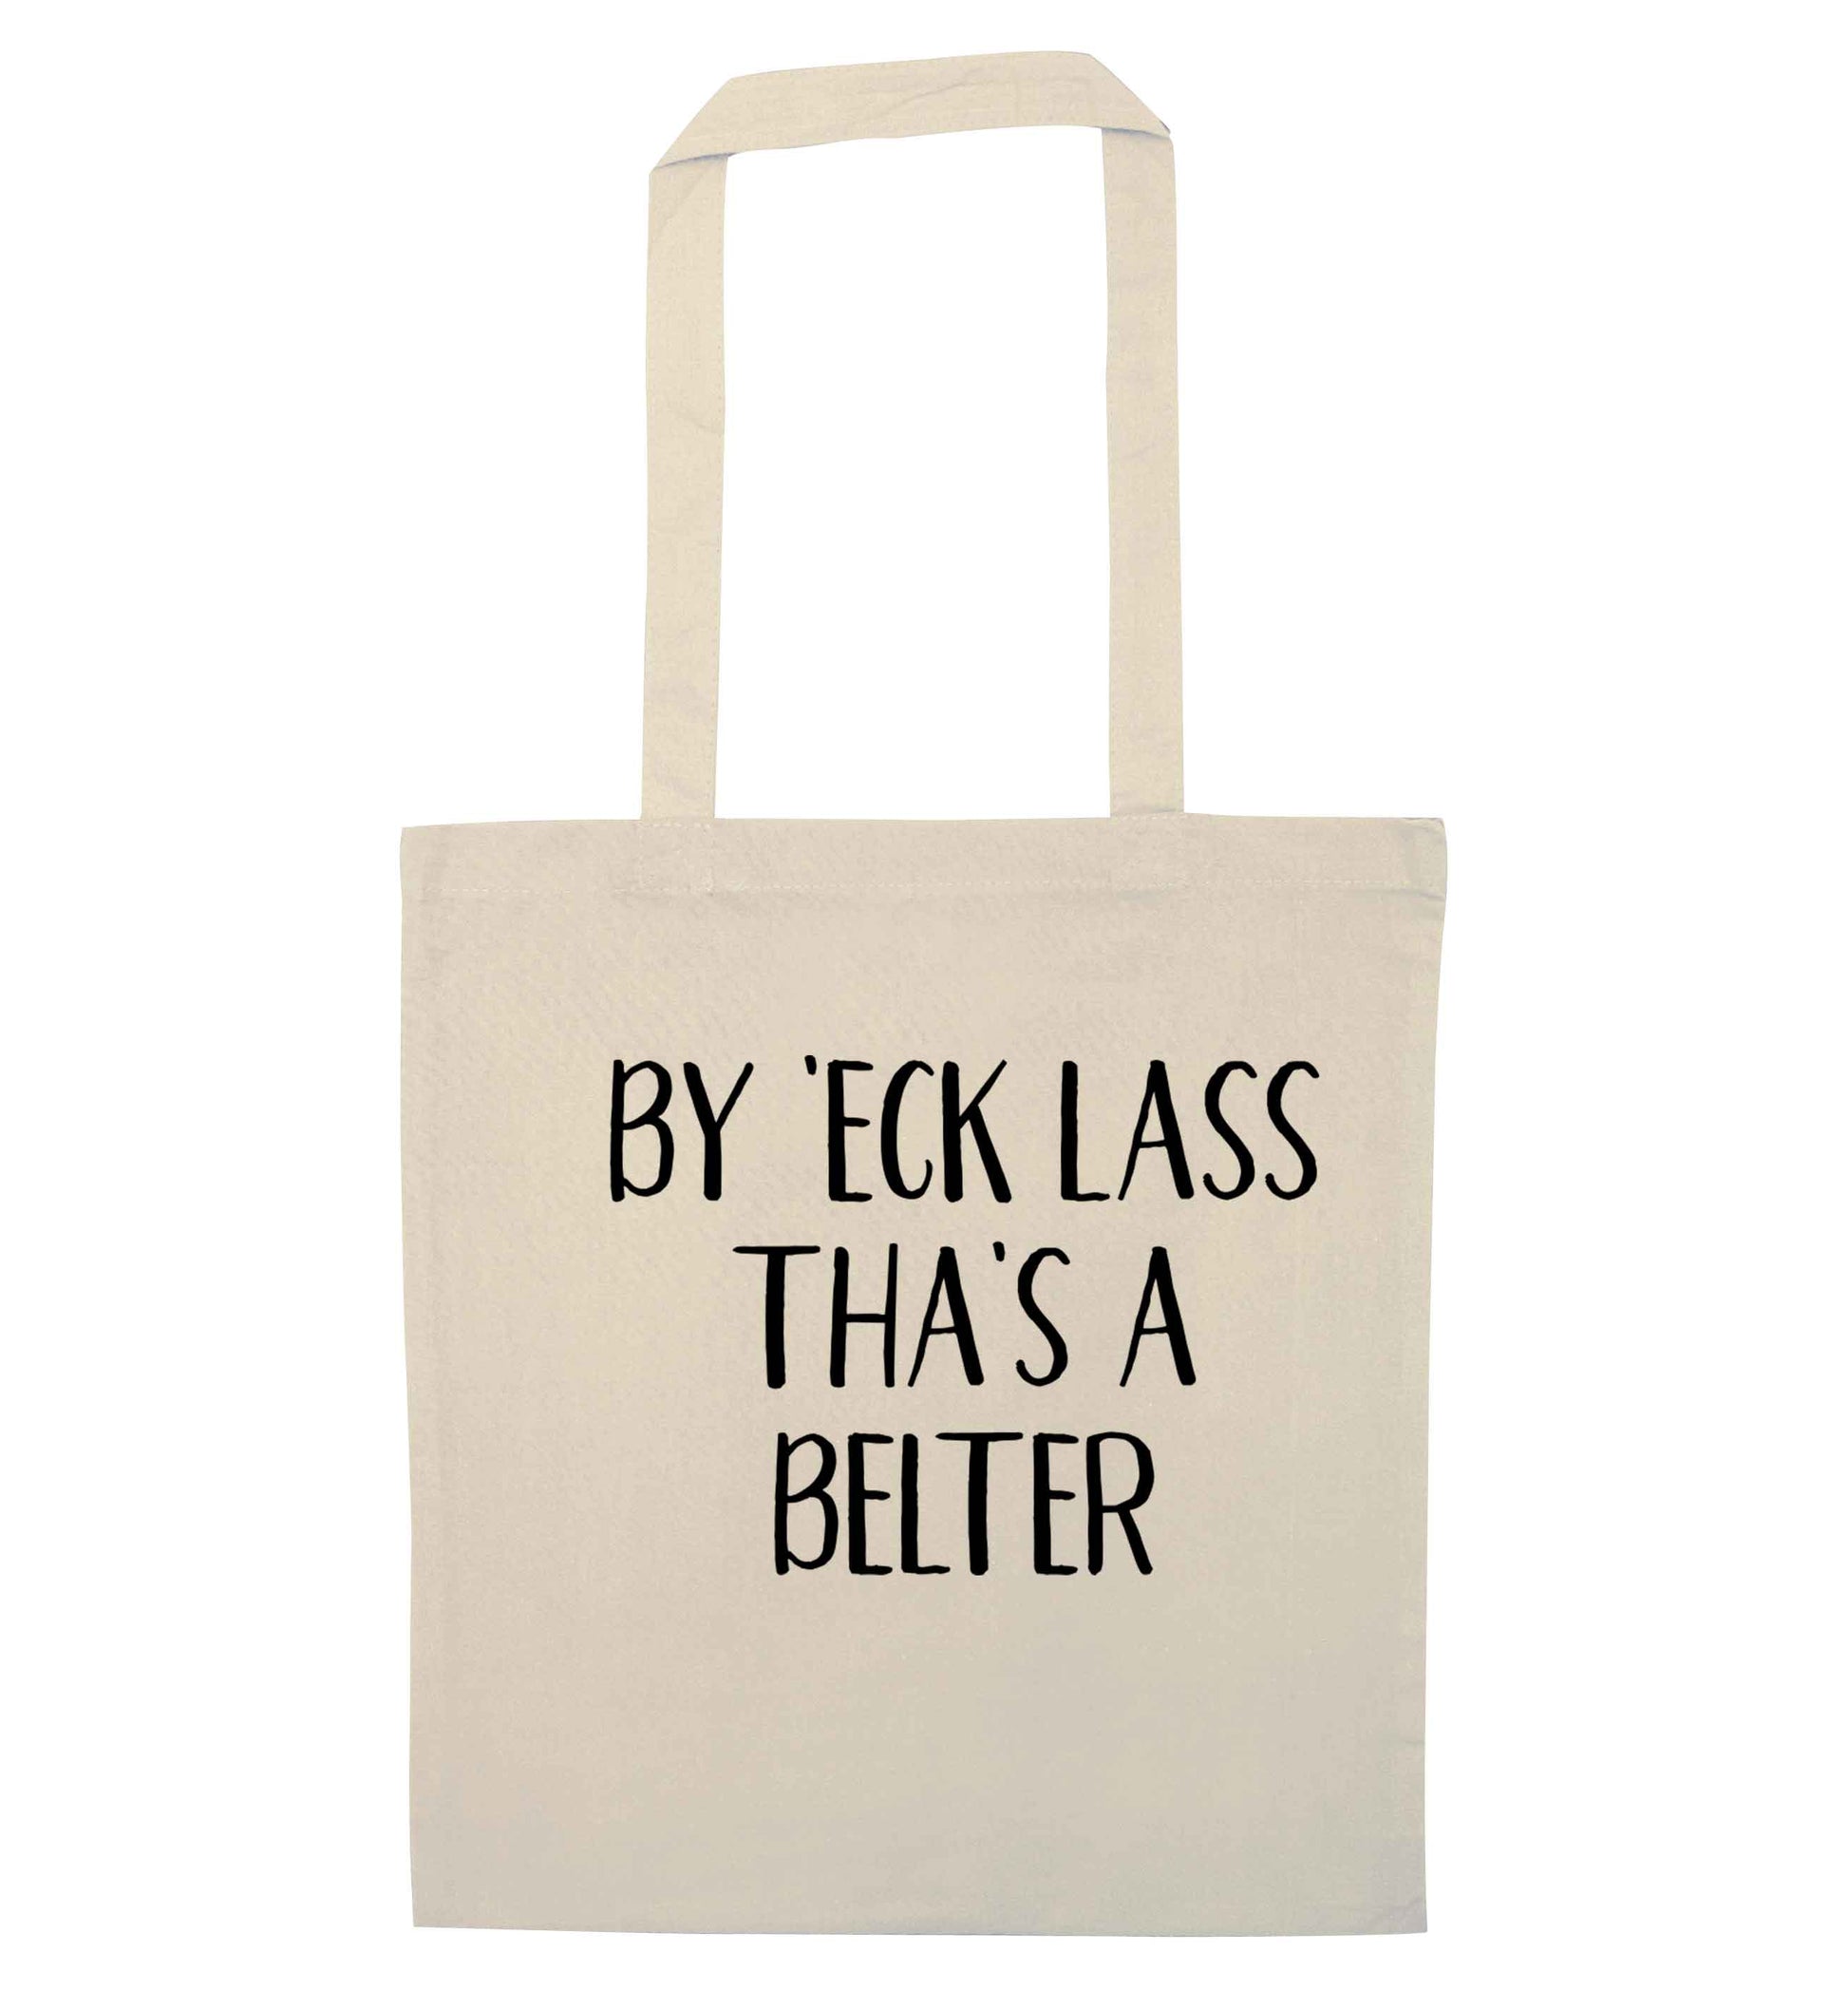 Be 'eck lass tha's a belter natural tote bag